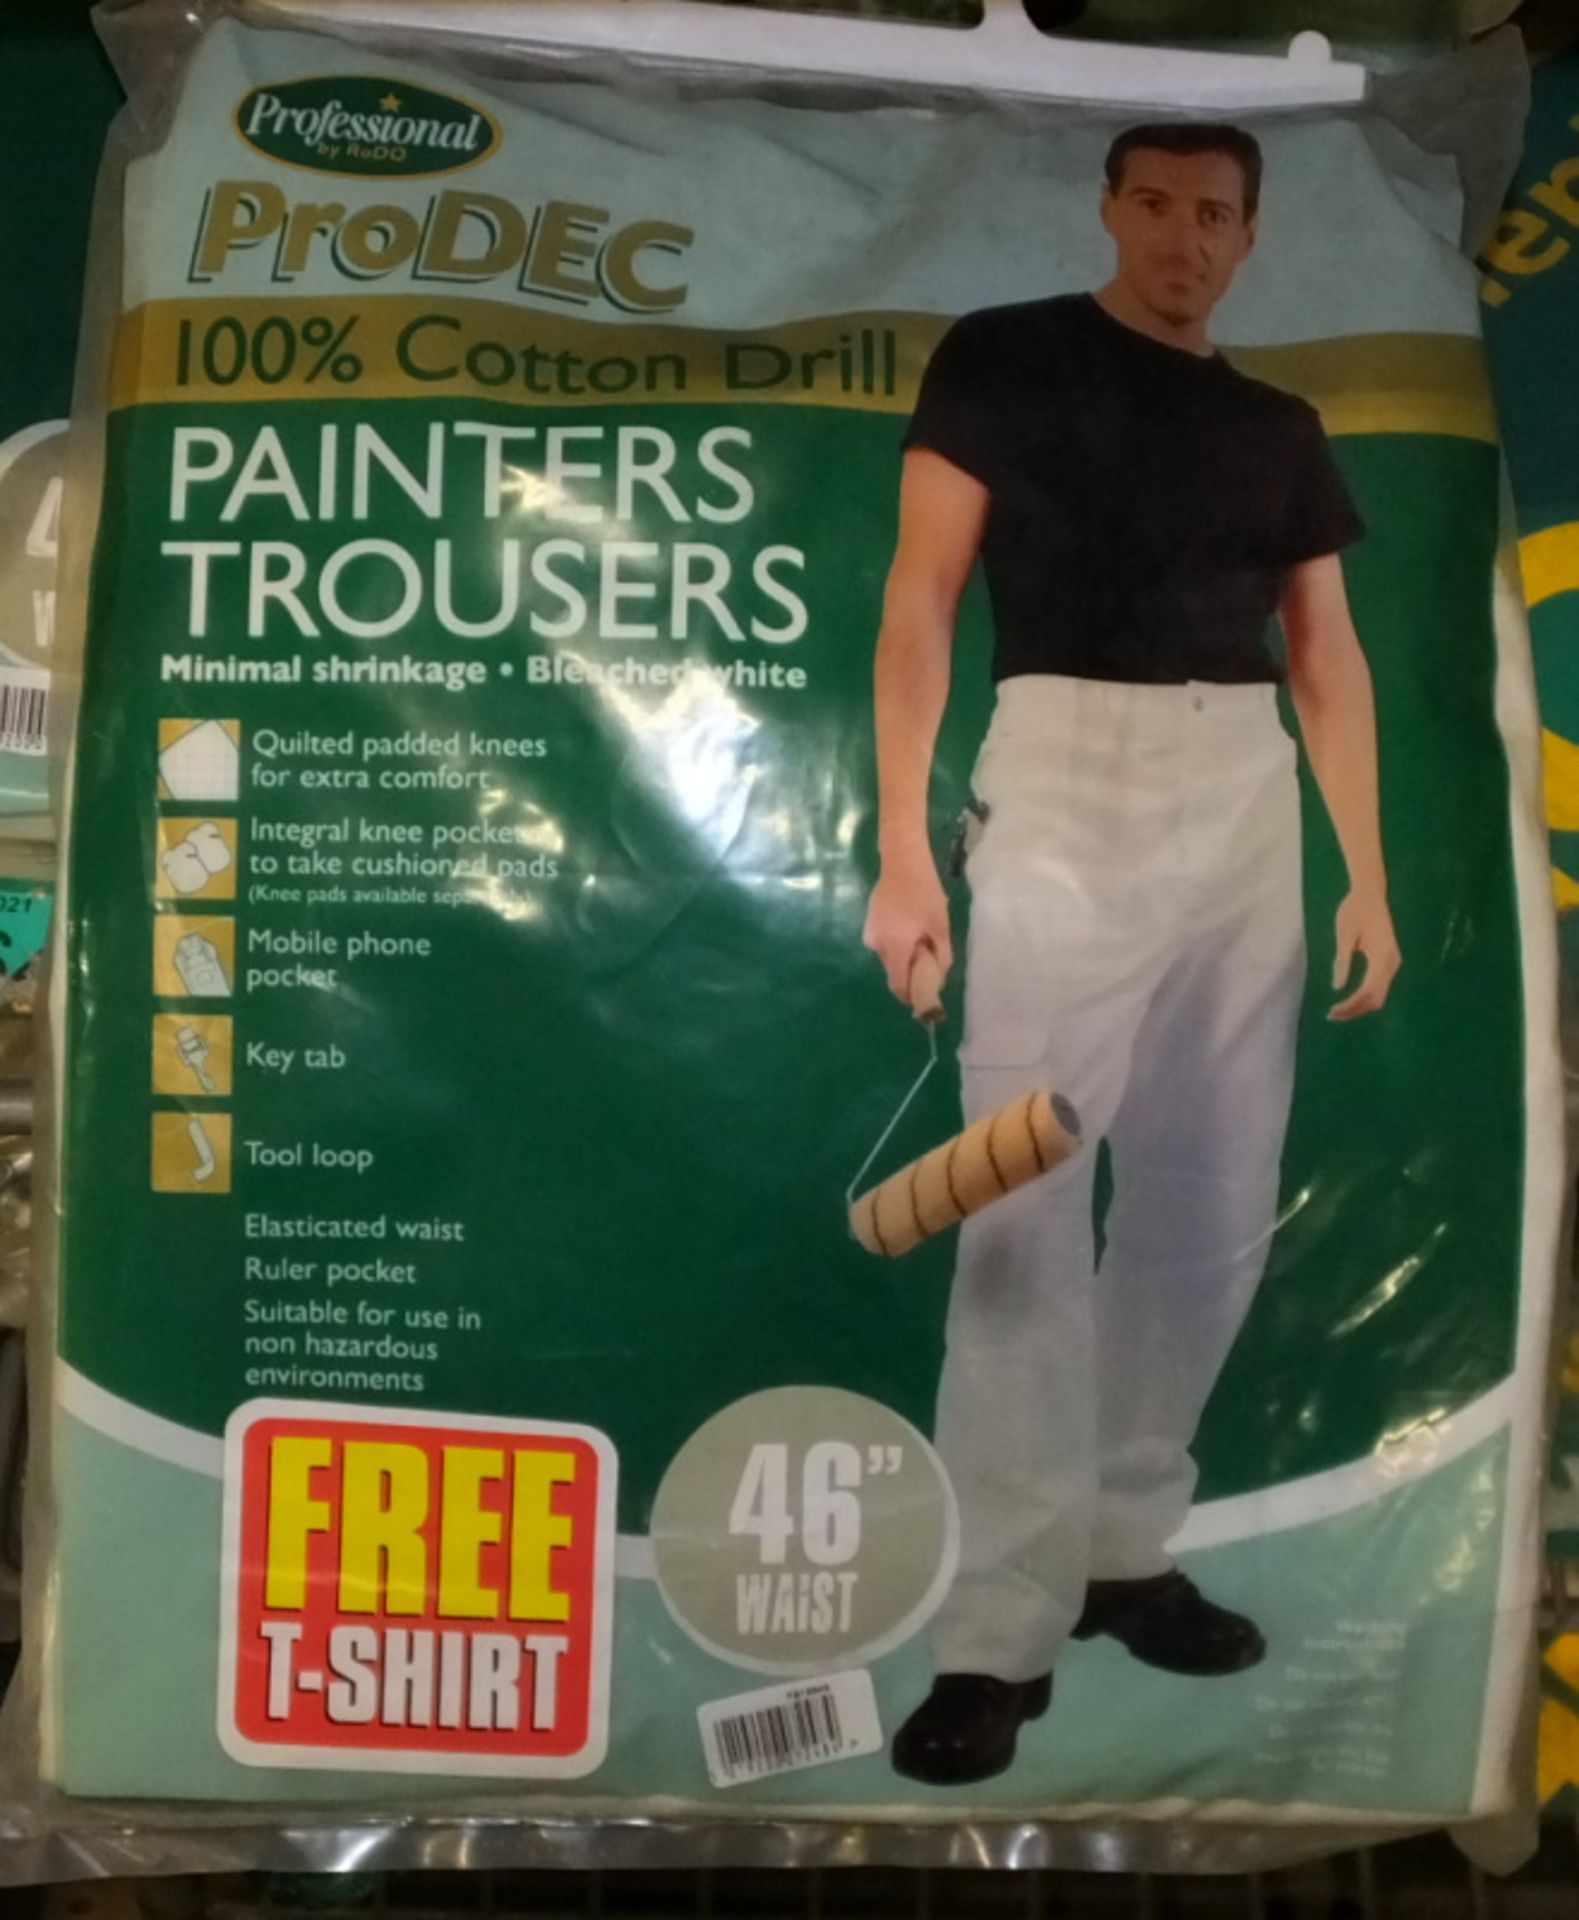 ProDec cotton painter trousers - 46 inch waist - 4 pairs - Image 2 of 2